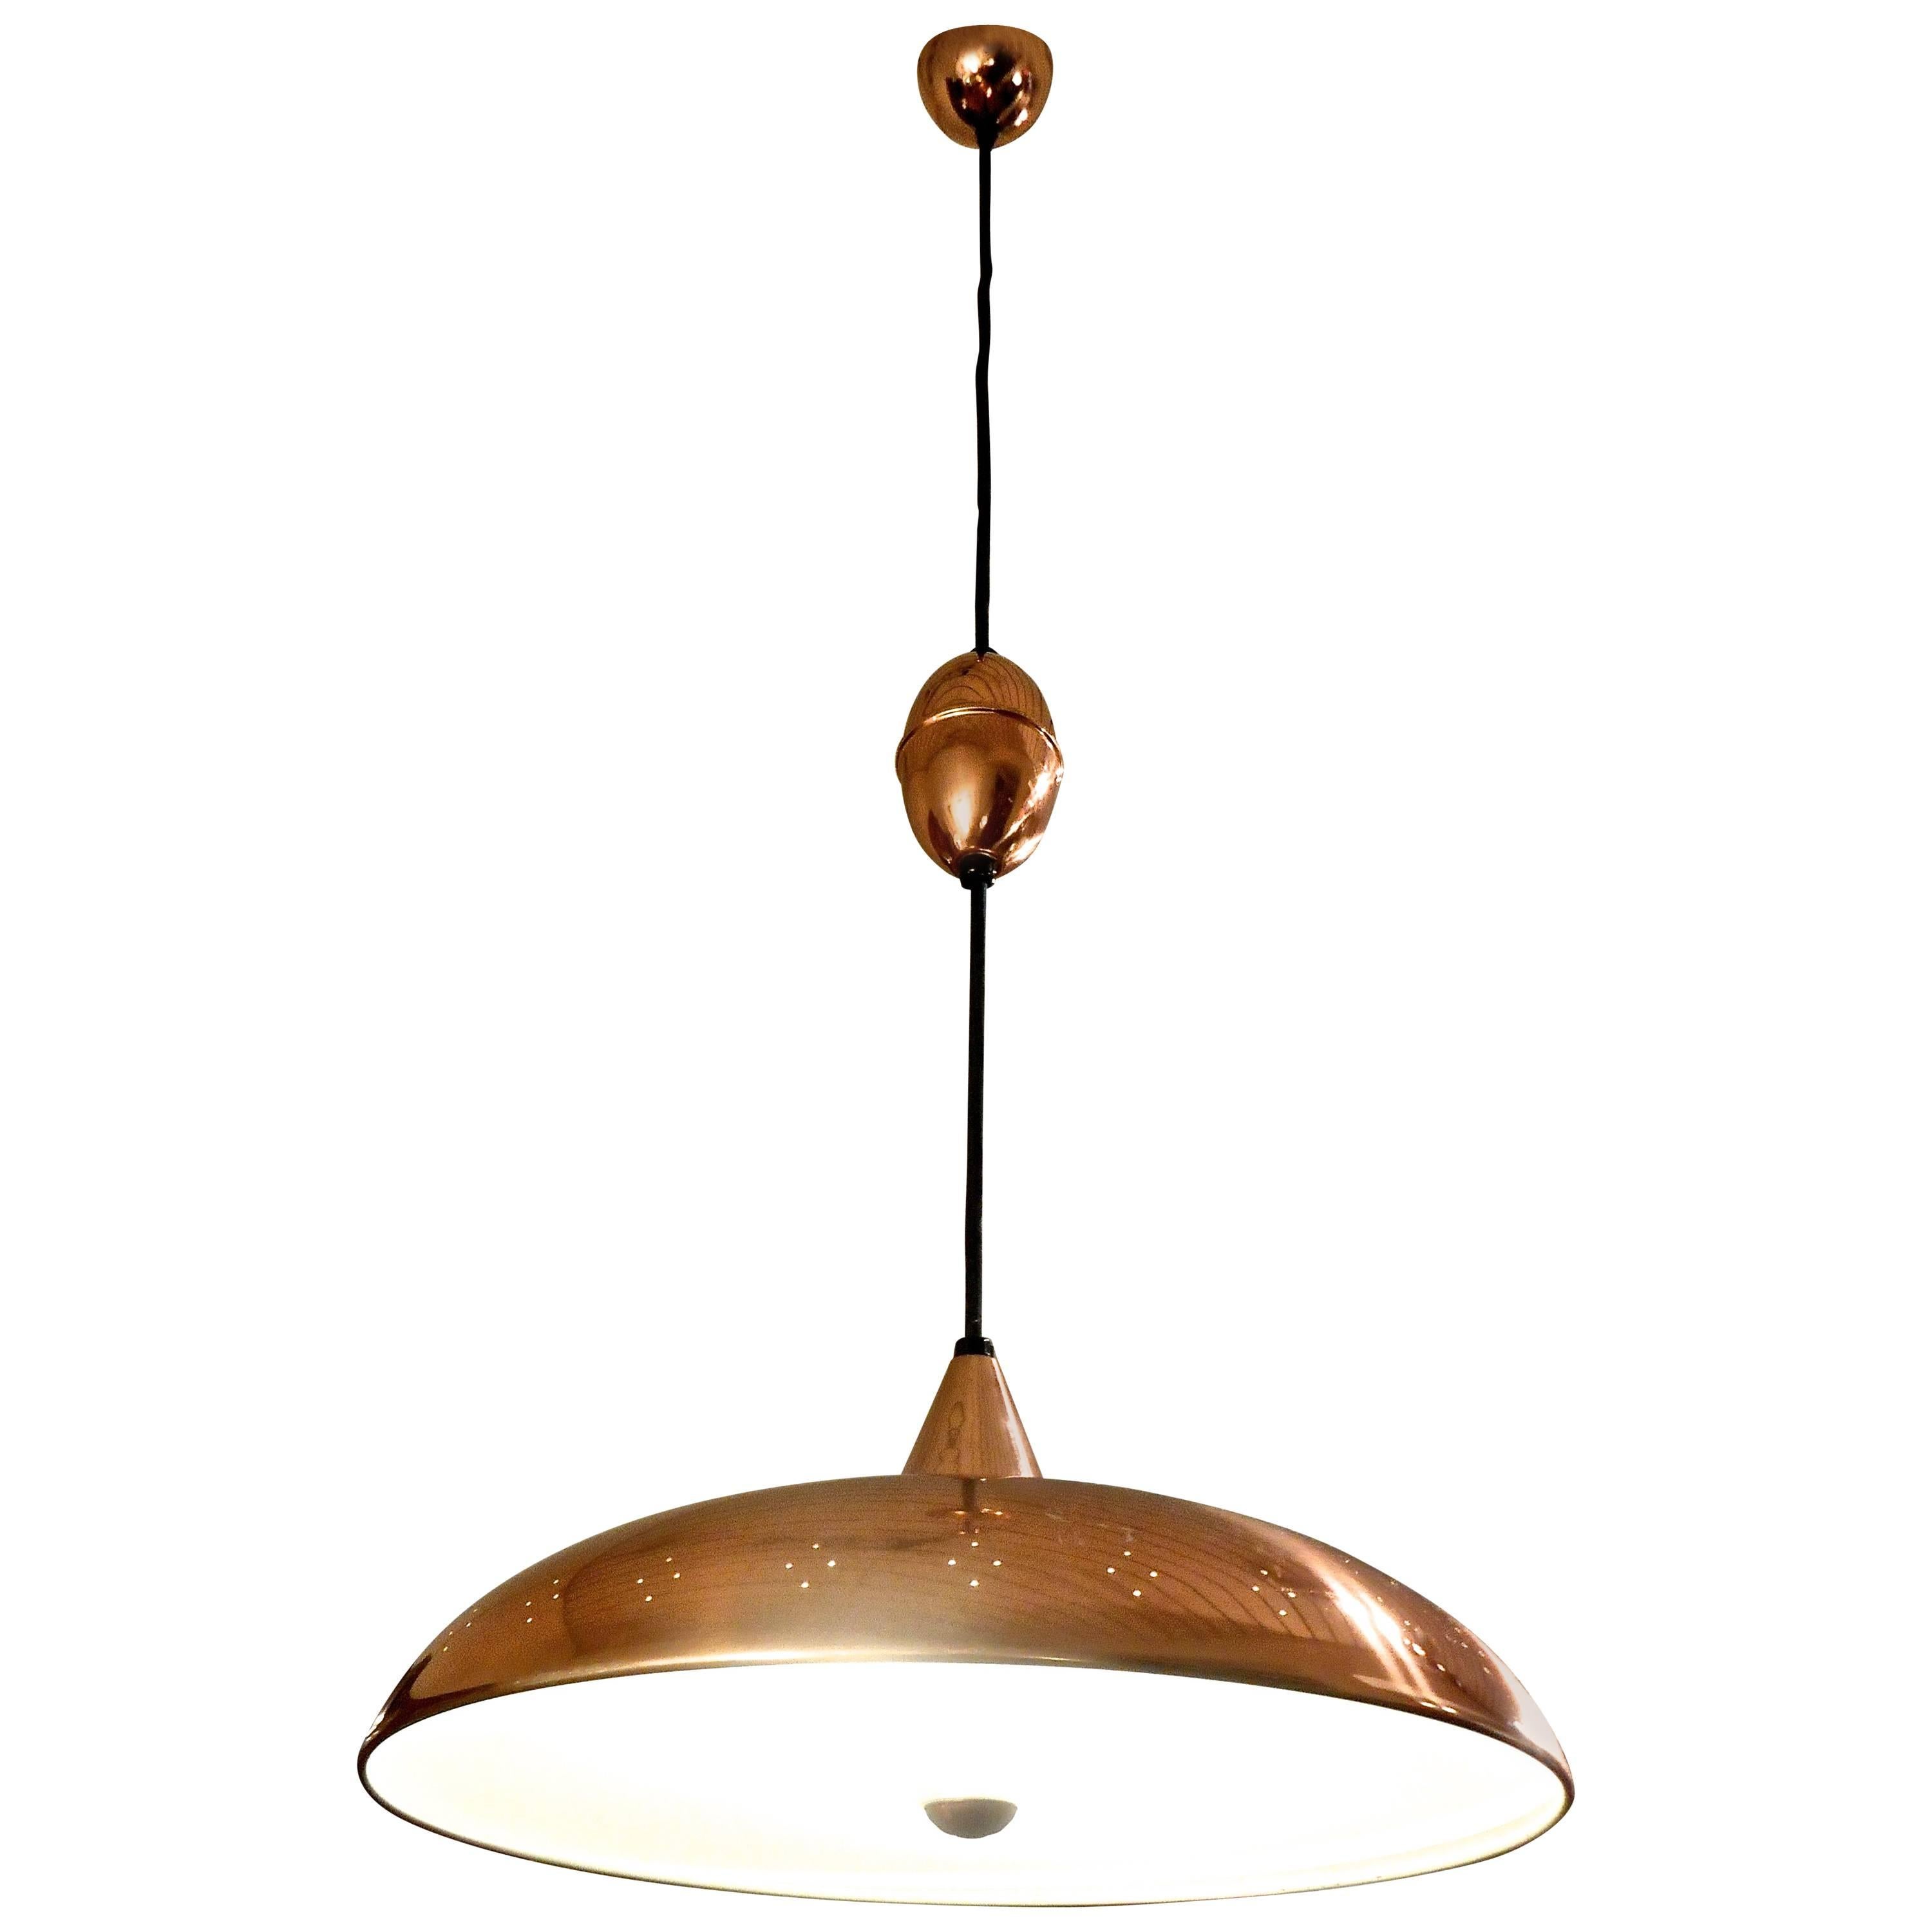 1960s Scandinavian Pull Down Ceiling Lamp For Sale